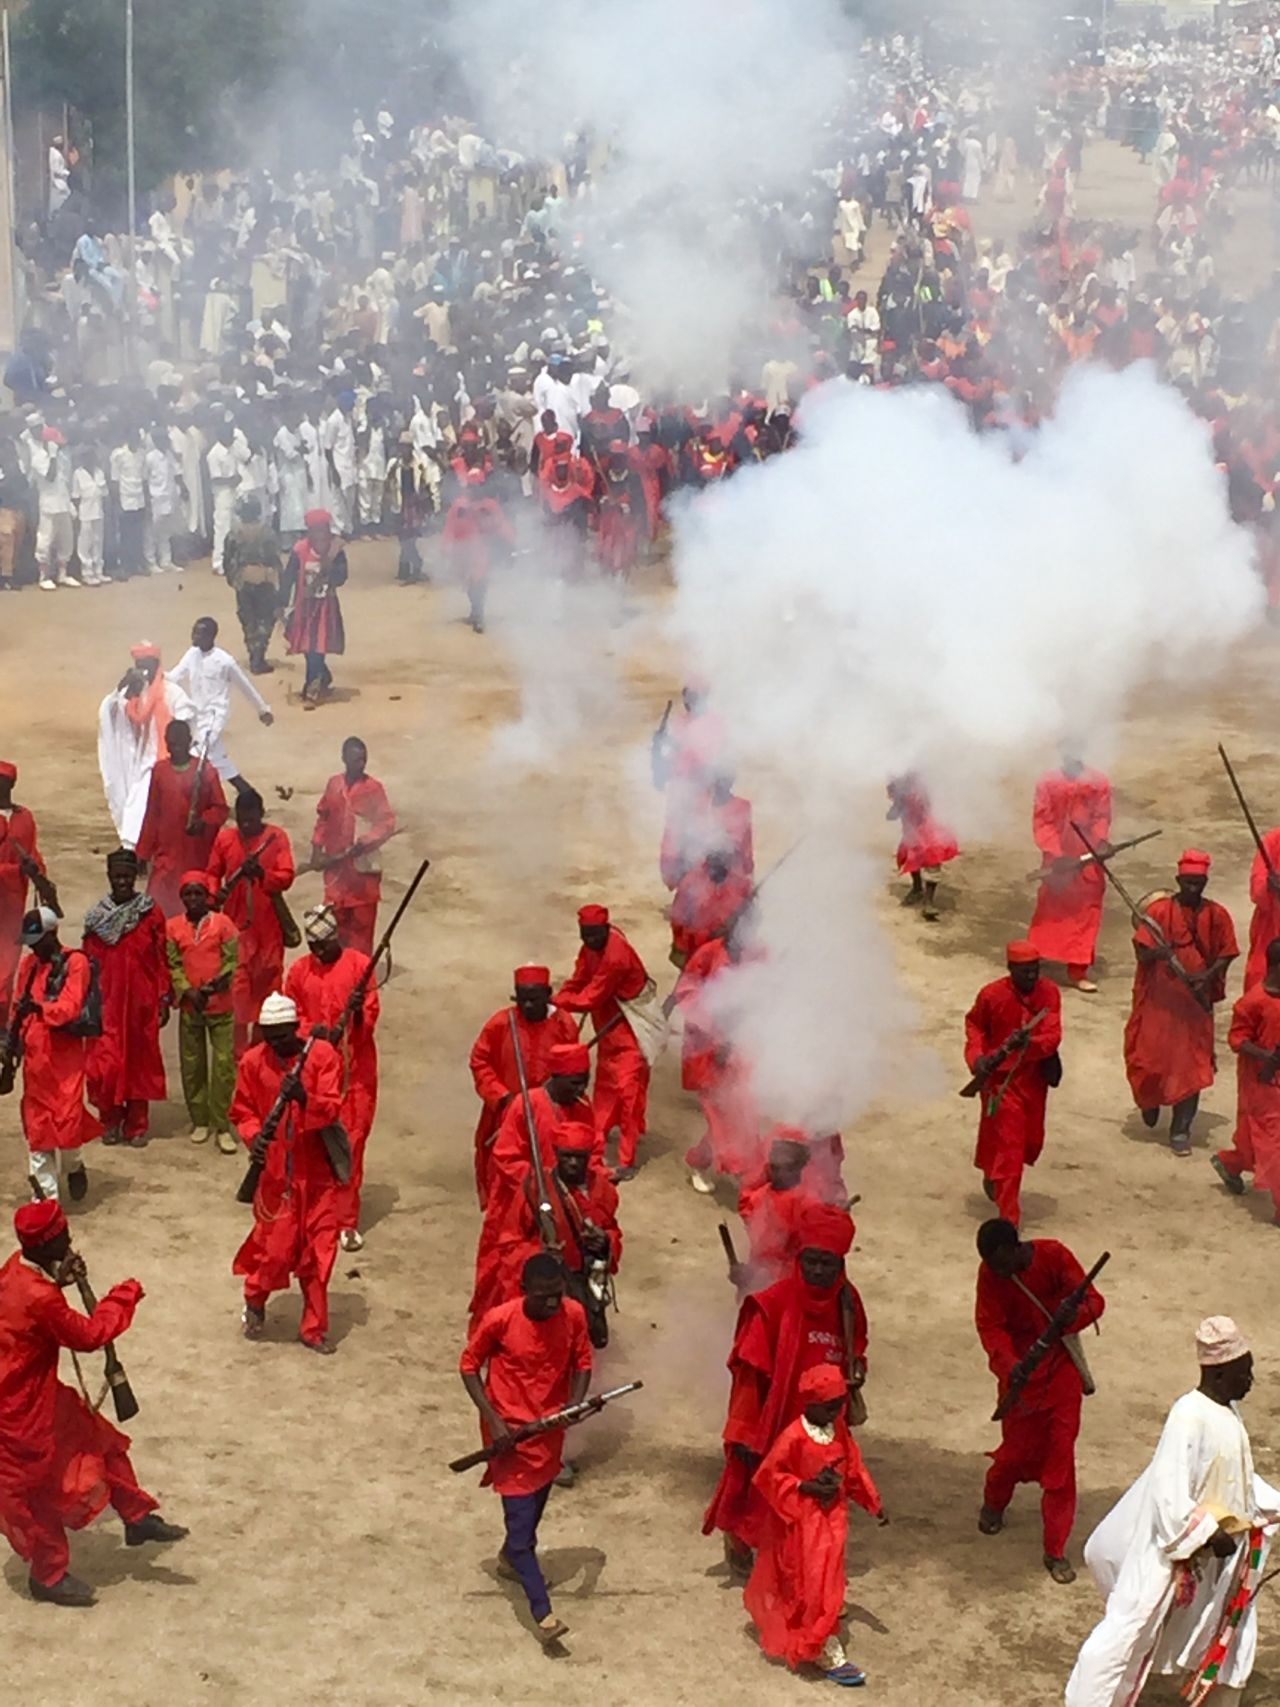 The Durbar features a parade of vibrantly clad horsemen in colorful traditional robes and turbans who process by regiments to the Emir's palace led by local leaders, local musicians and traditional performers setting off loud muskets to a delighted palace audience as they honor the Emir.